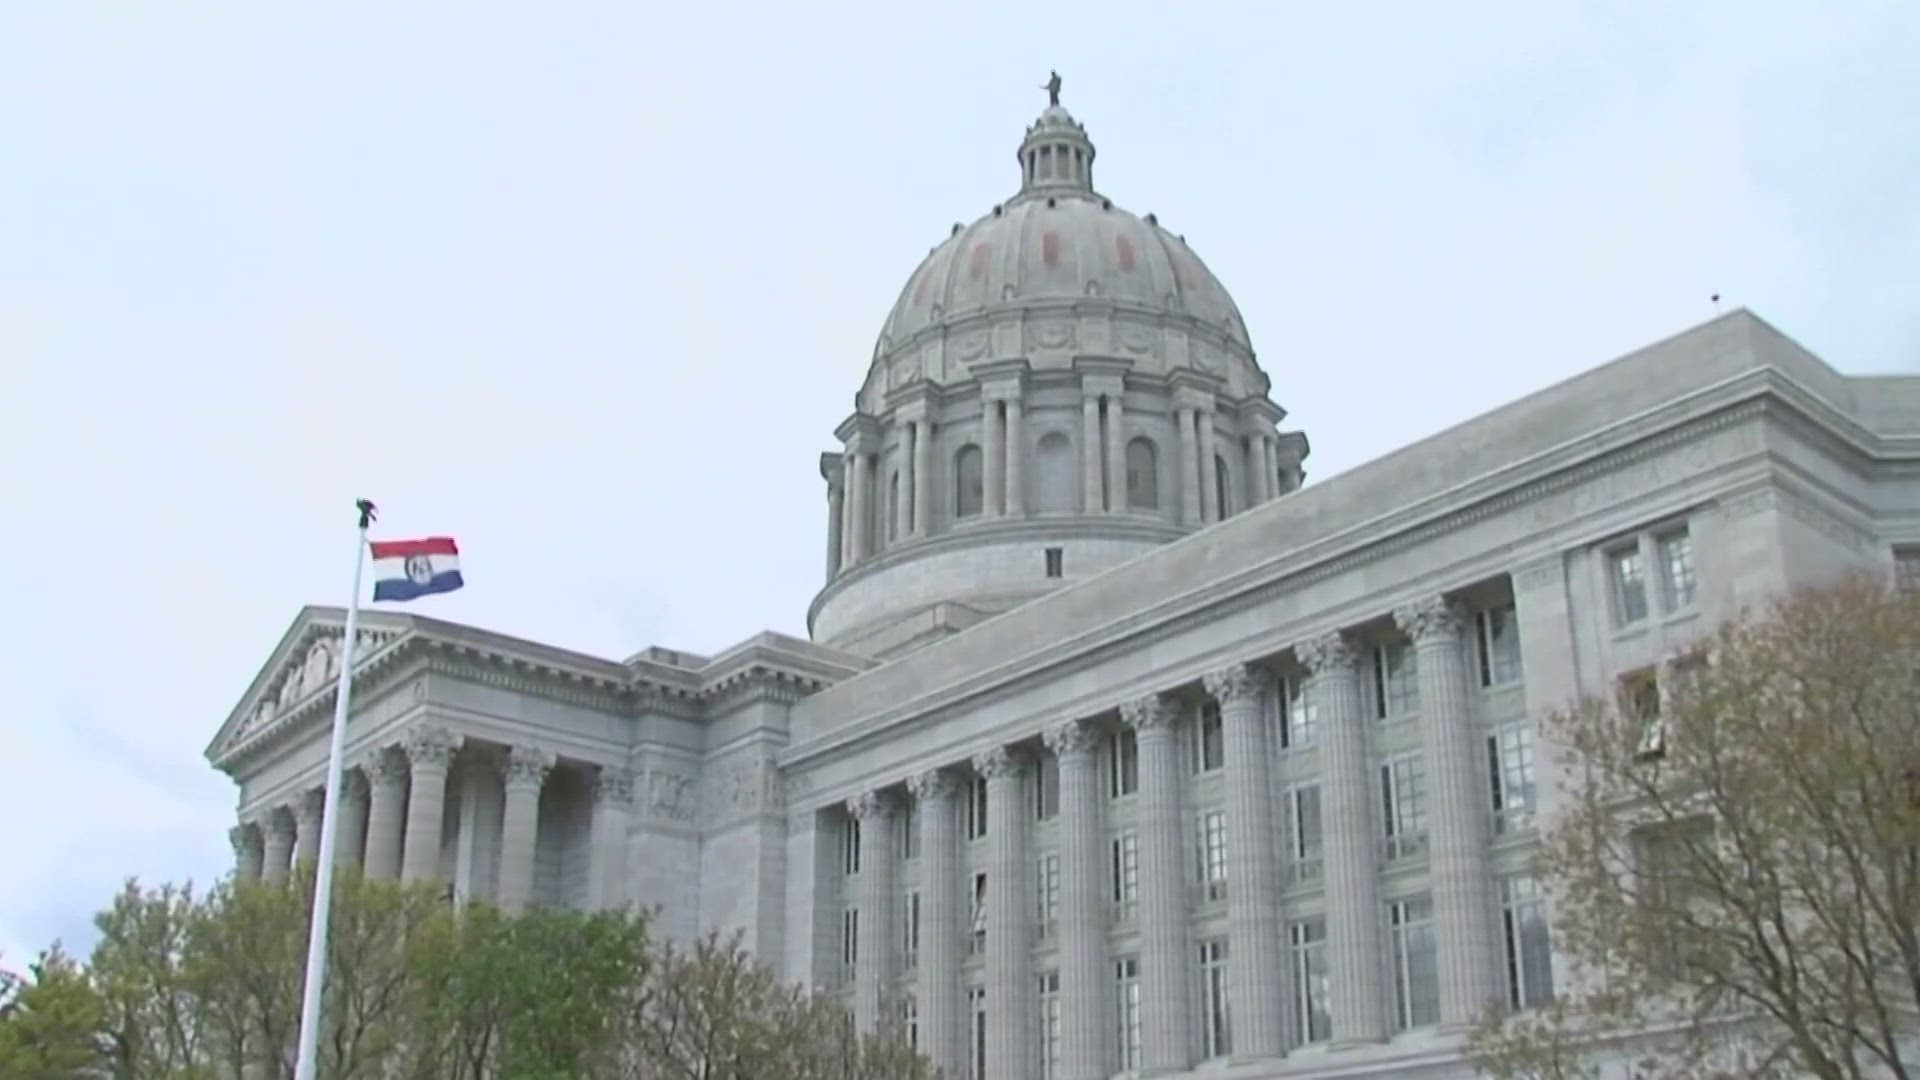 Missouri youths would no longer receive gender-affirming treatments under a bill passed Thursday by the state Senate. The bill now heads to the GOP-led House.